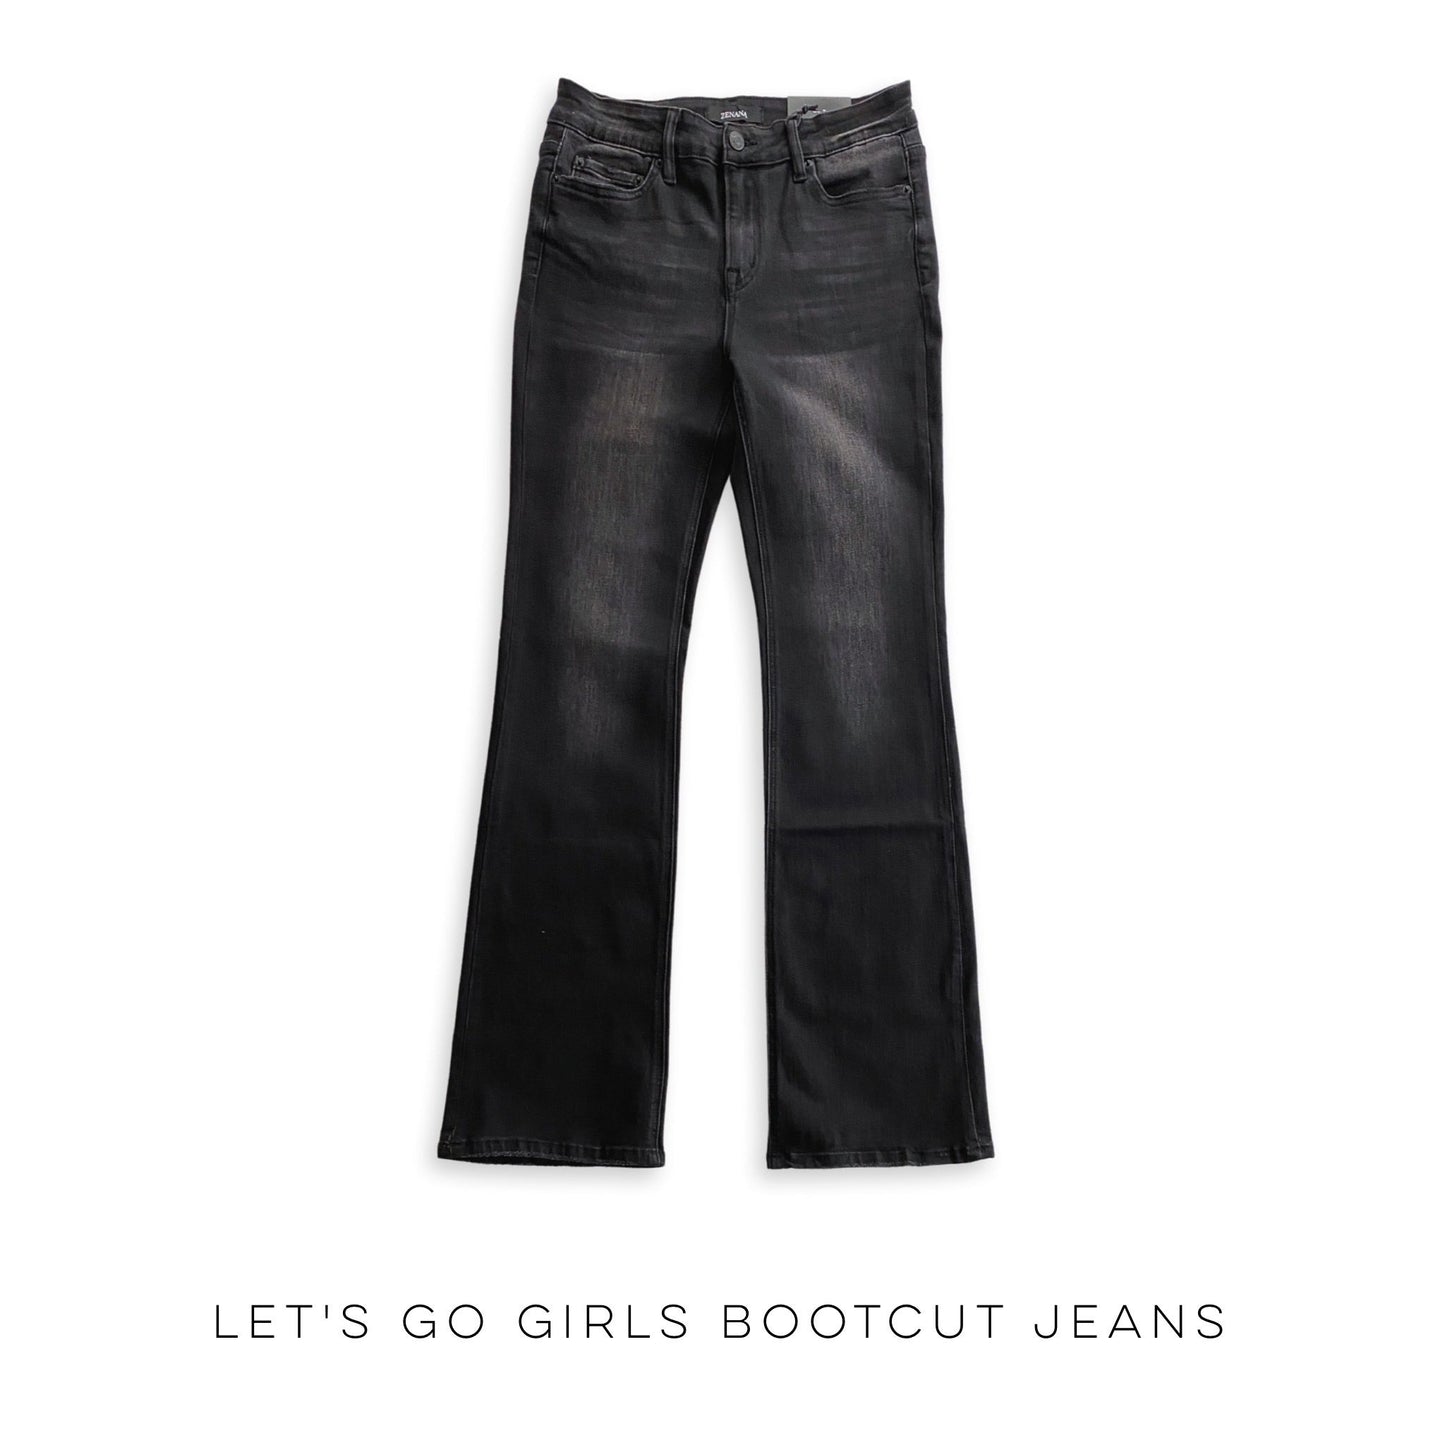 Let's Go Girls Bootcut Jeans